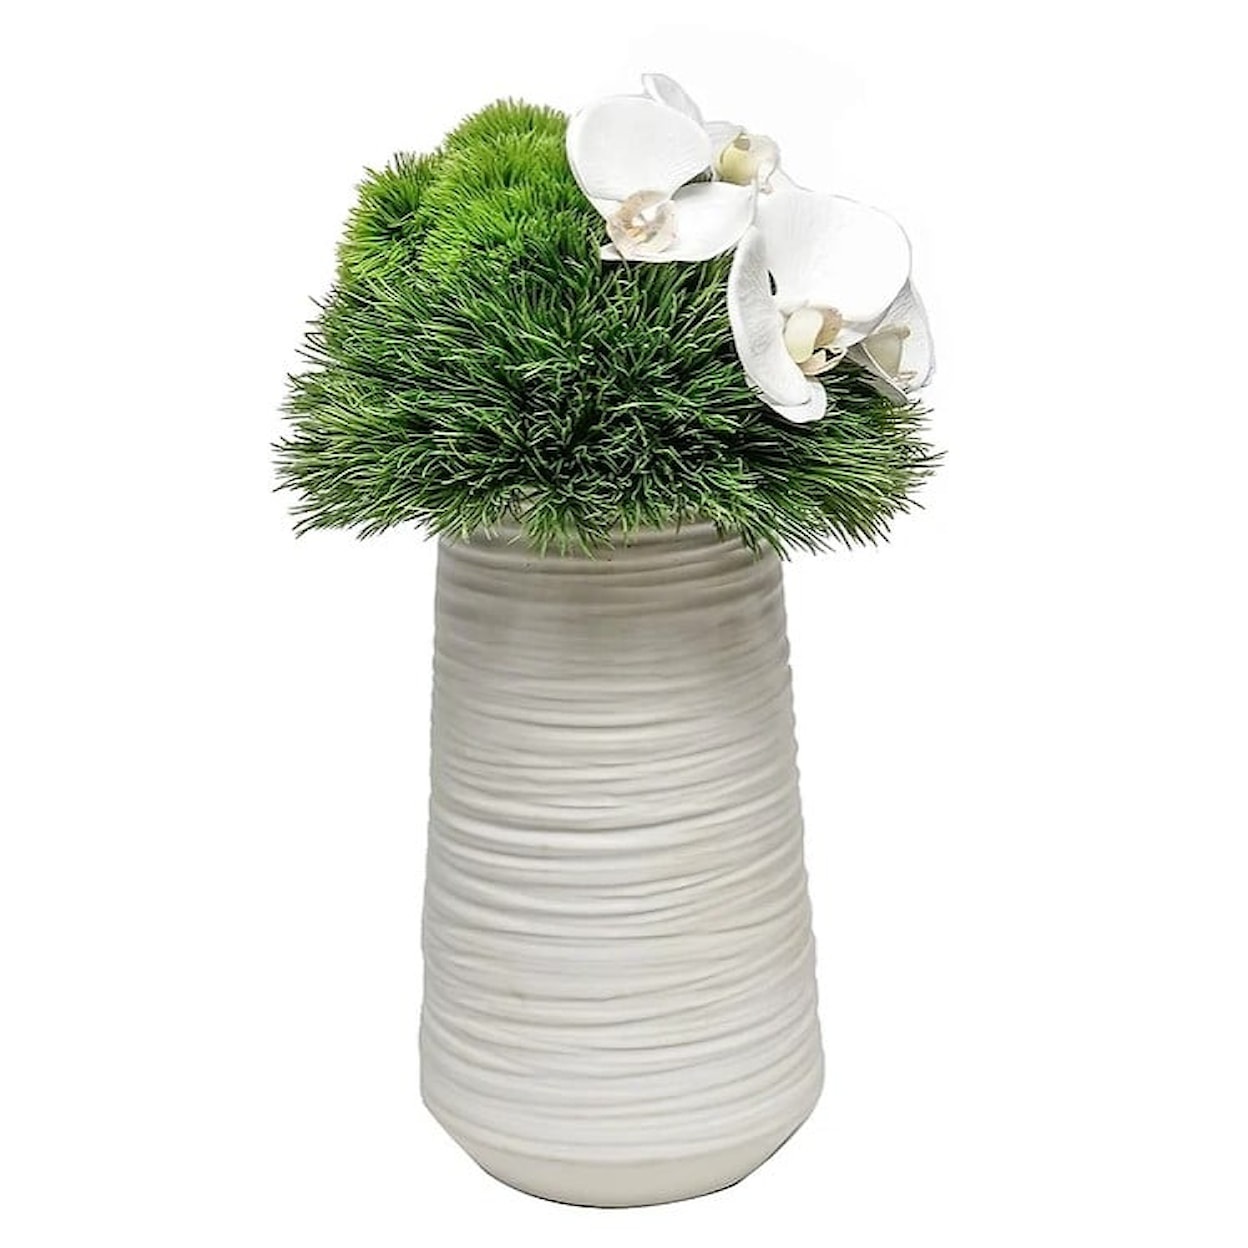 The Ivy Guild Orchids Tall White Vase w/ Grass Dome/Orchid